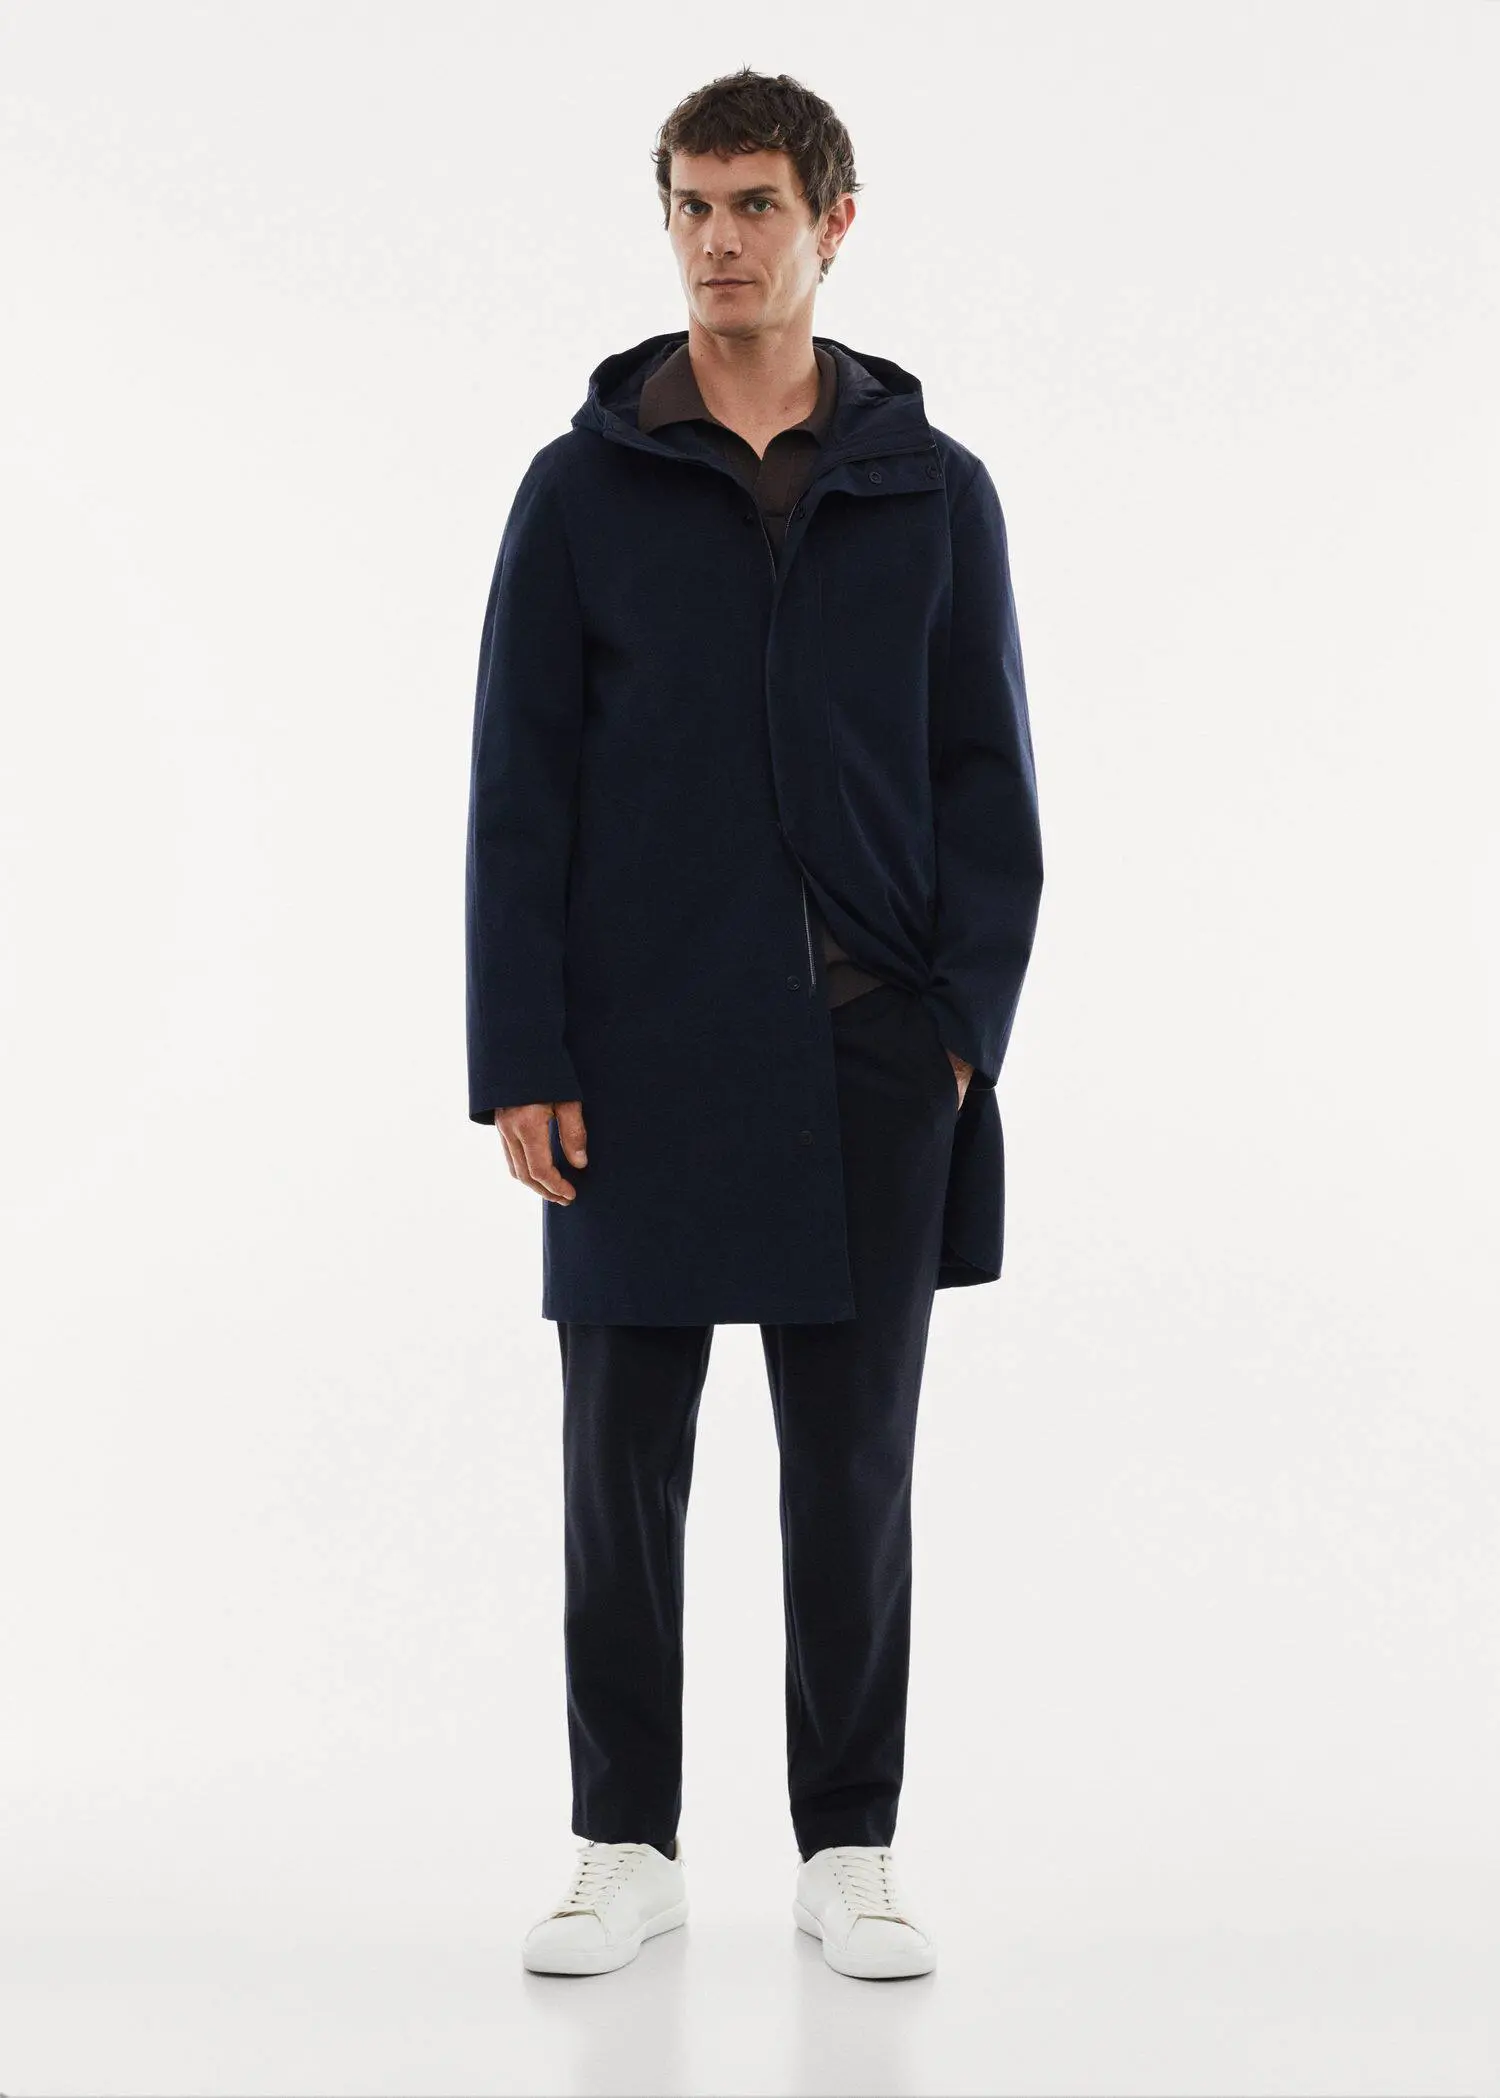 Mango Water-repellent hooded parka. 2